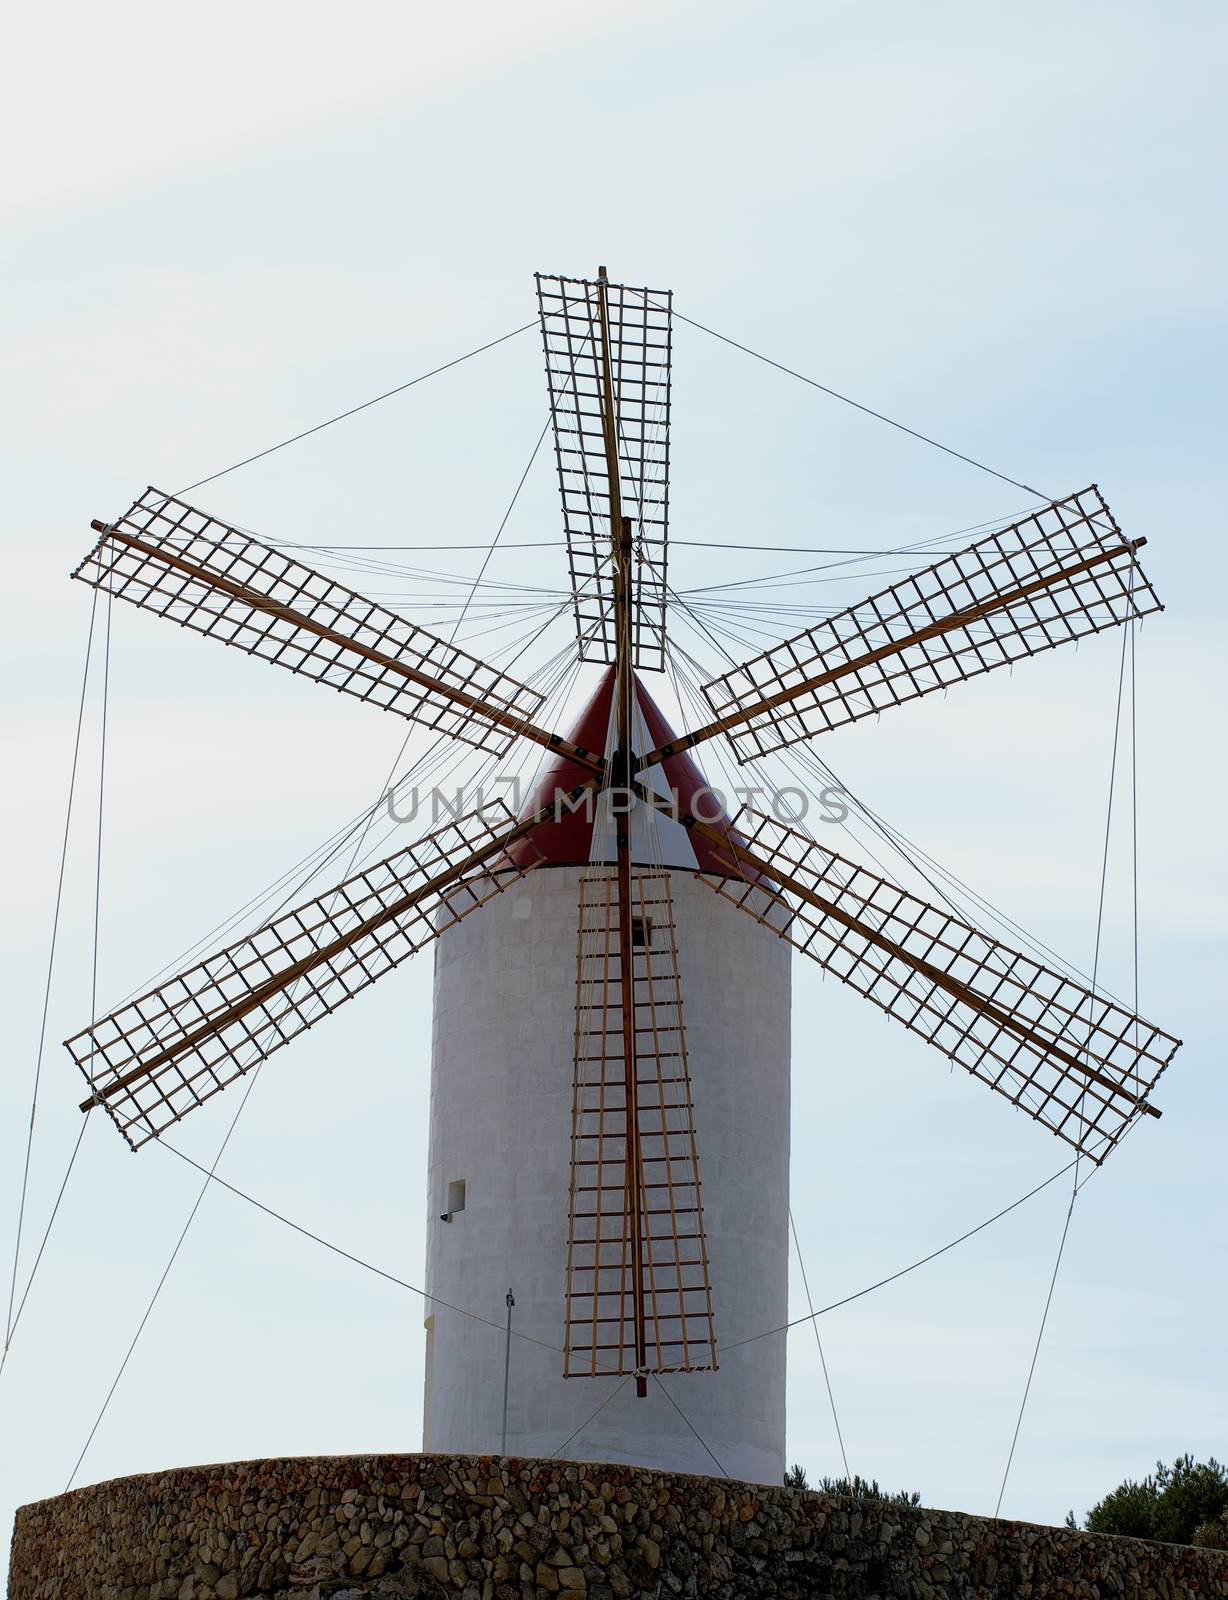 Beautiful Old Rustic Windmill on Cloudy Sky background Outdoors, Menorca, Balearic Islands